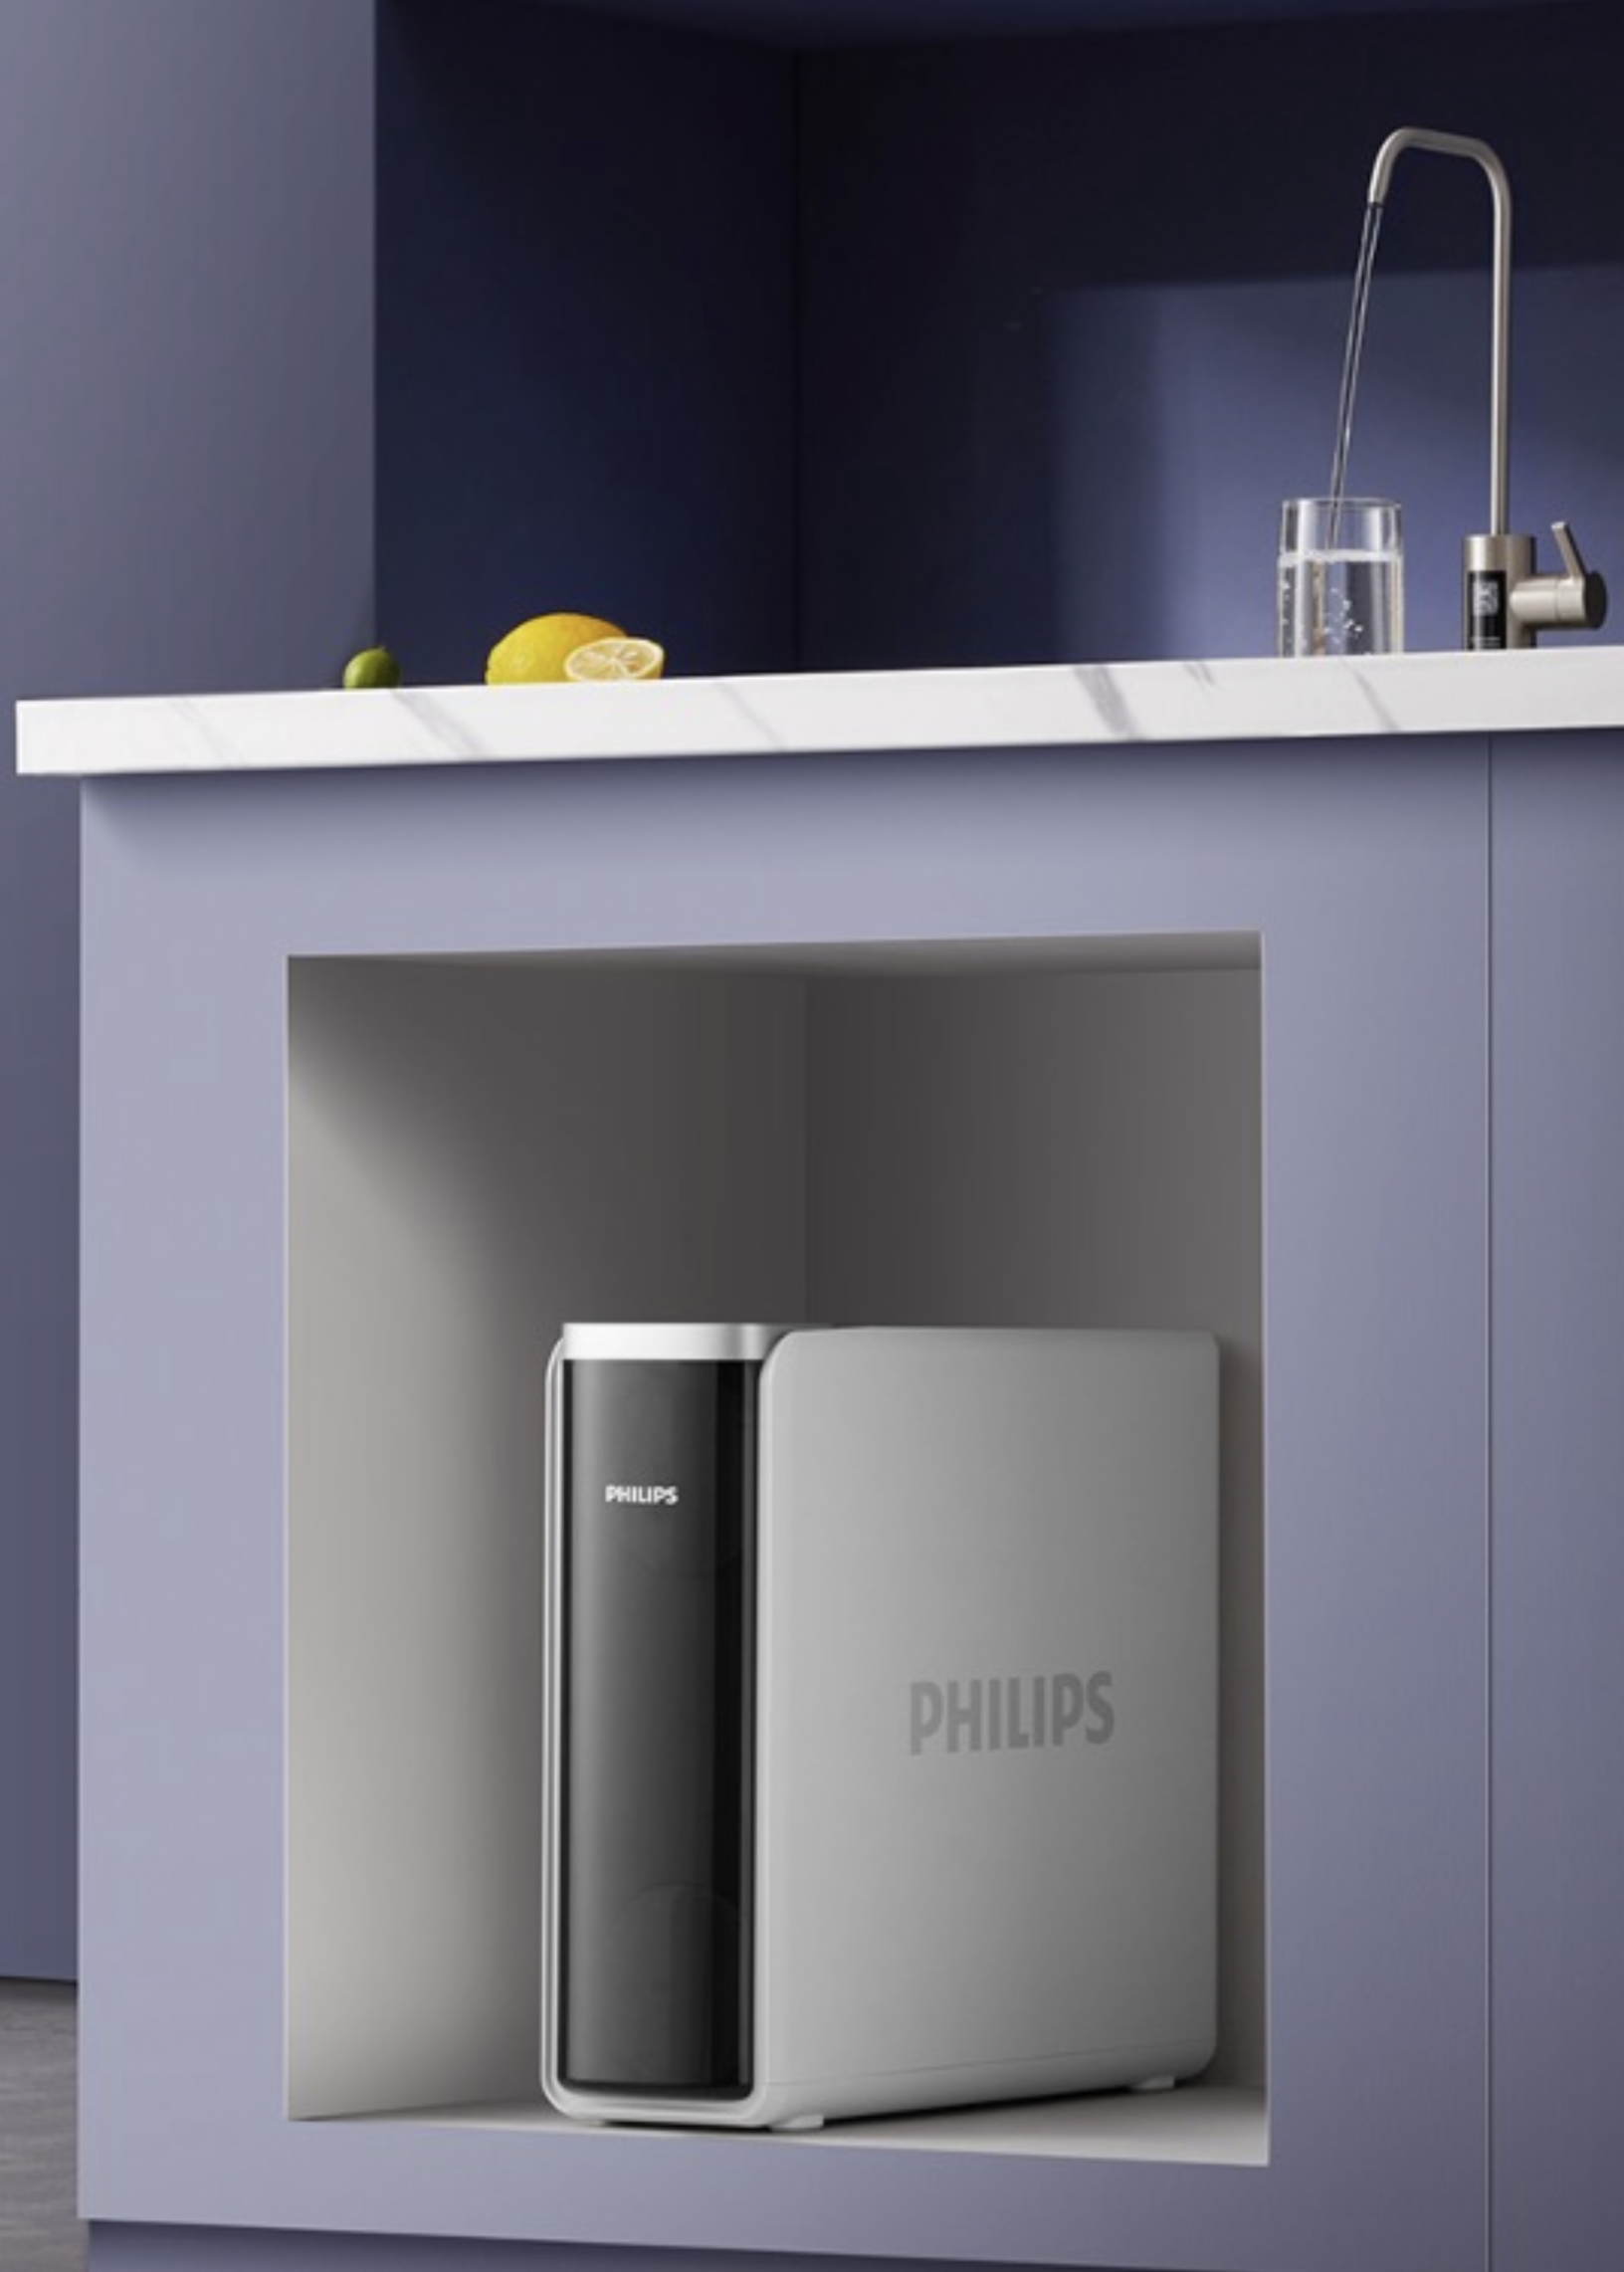 Philips Reverse Osmosis(RO) filtration